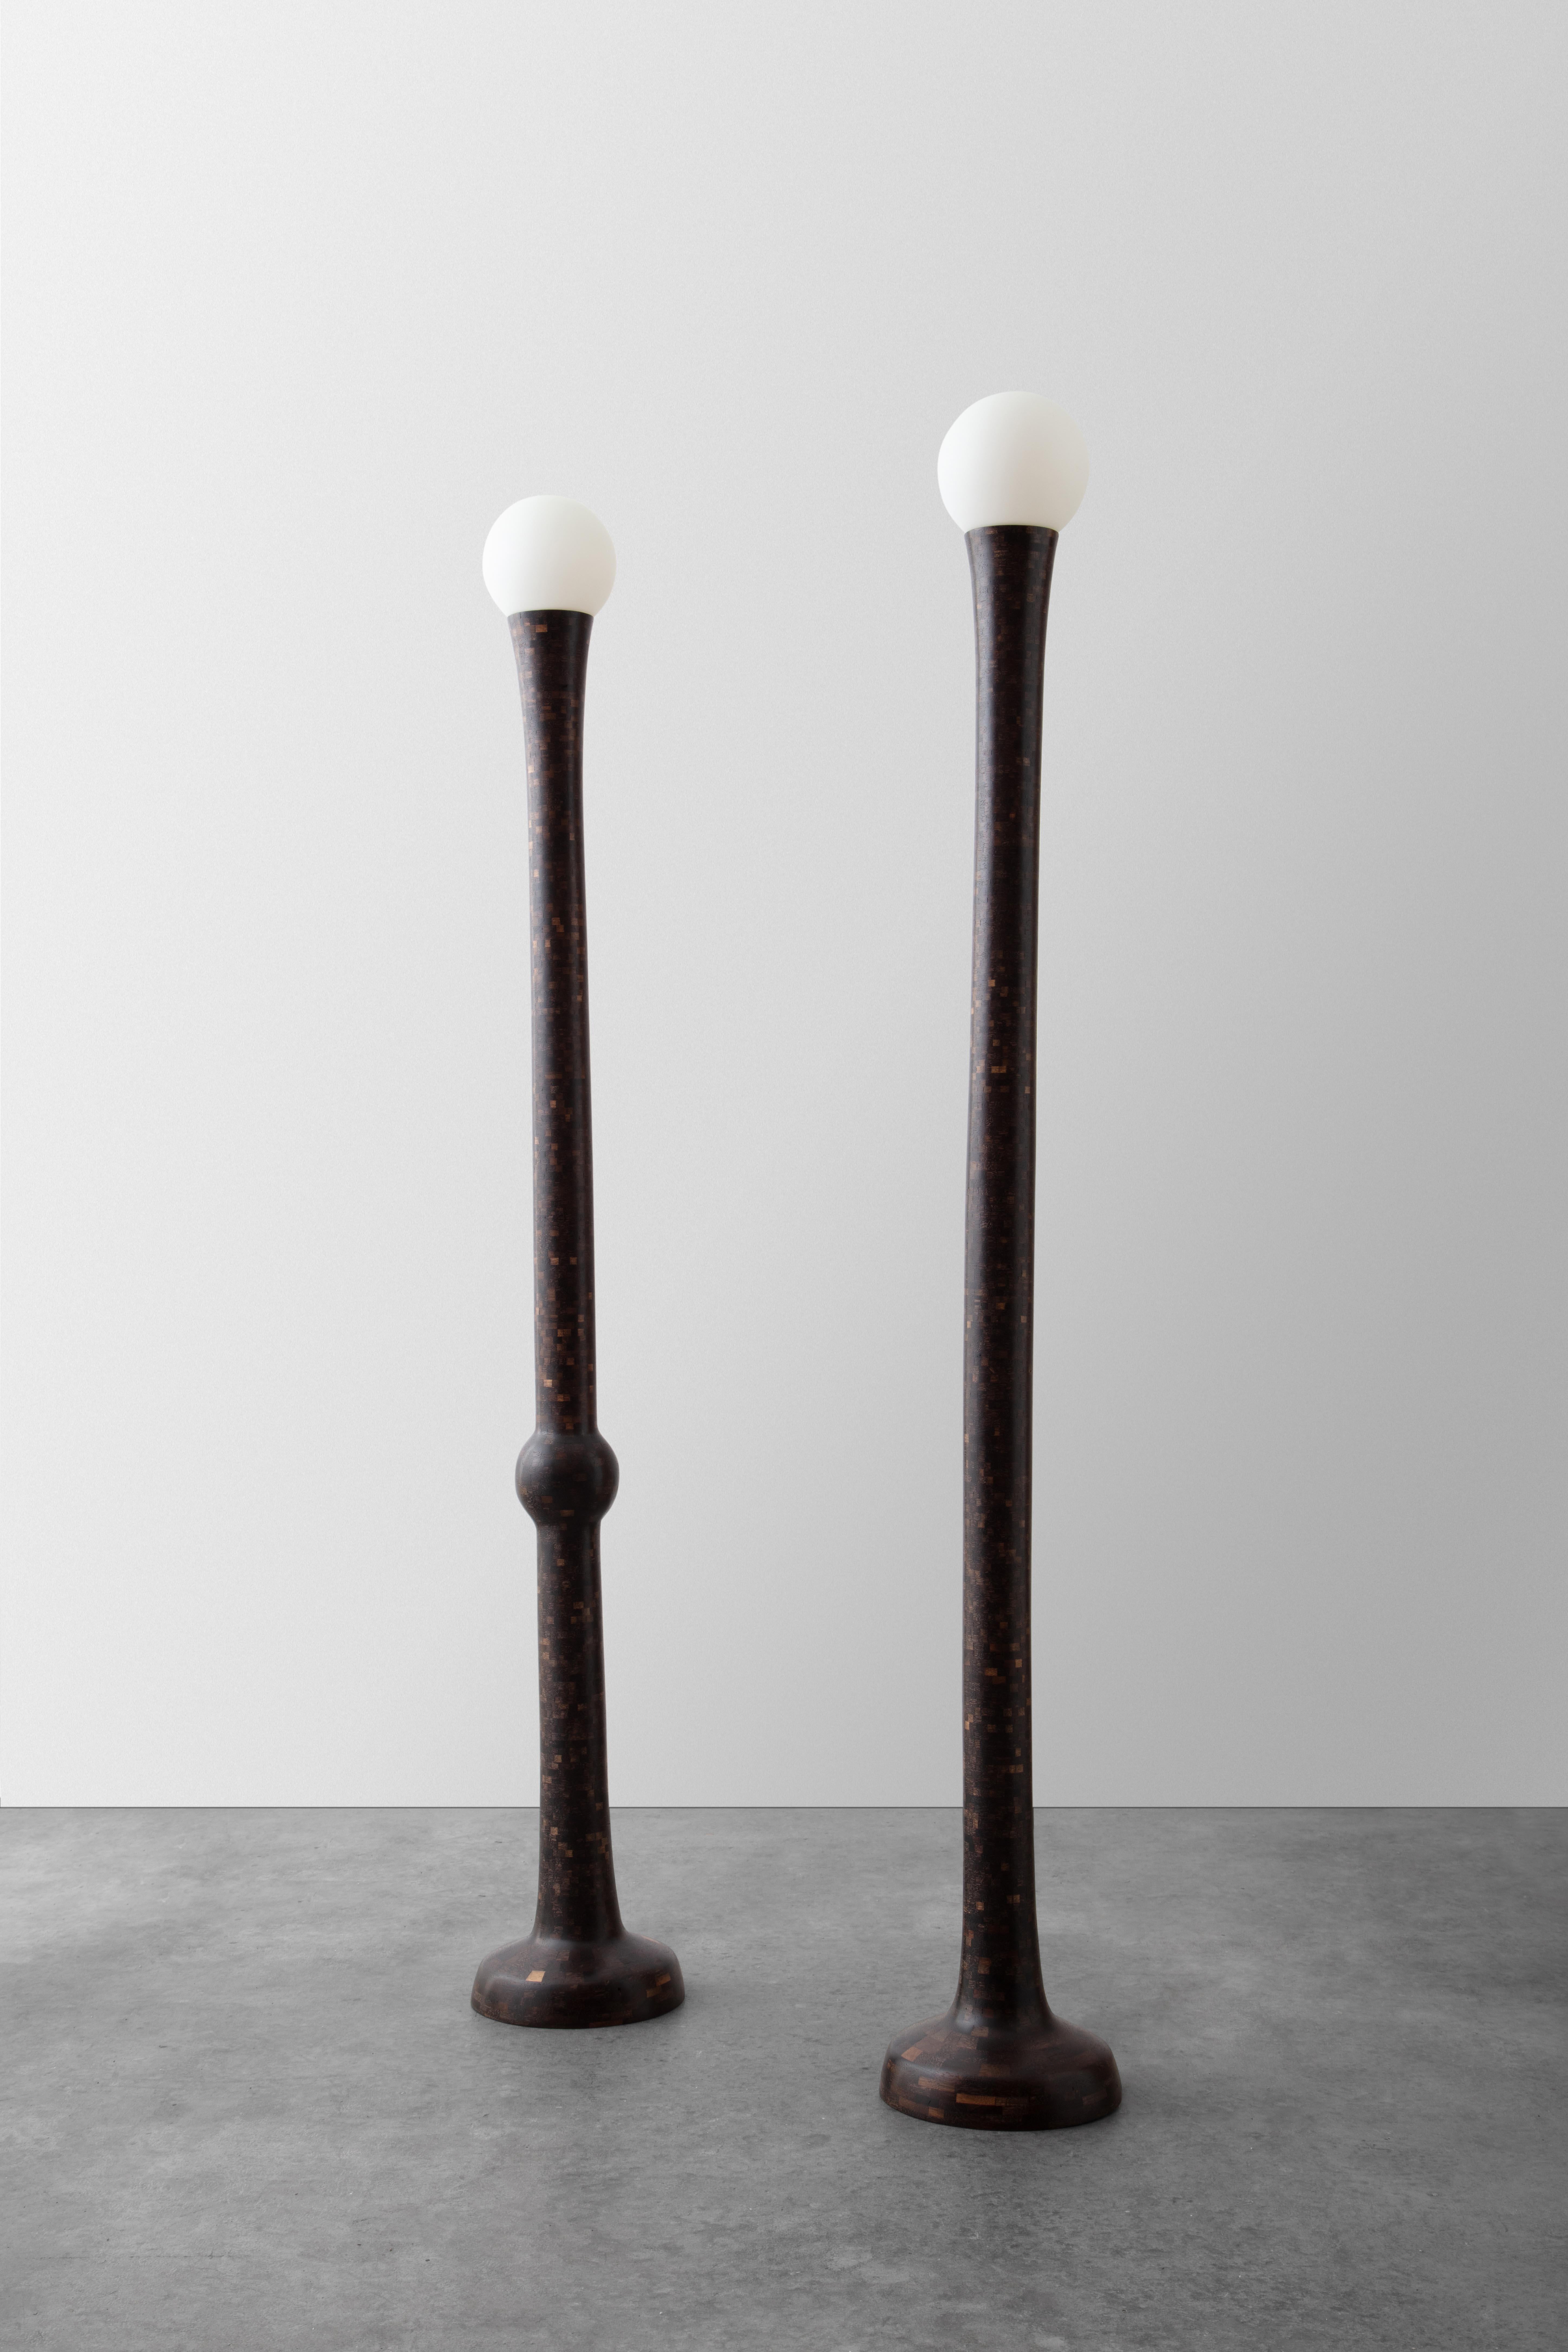 .This pair of STACKED post floor lamps was created from thousands of tiny pieces of wood, approximately 5000 pieces in each one. The simple column forms are subtly irregular and possess a slightly playful nature, perfectly imperfect. 

Made from